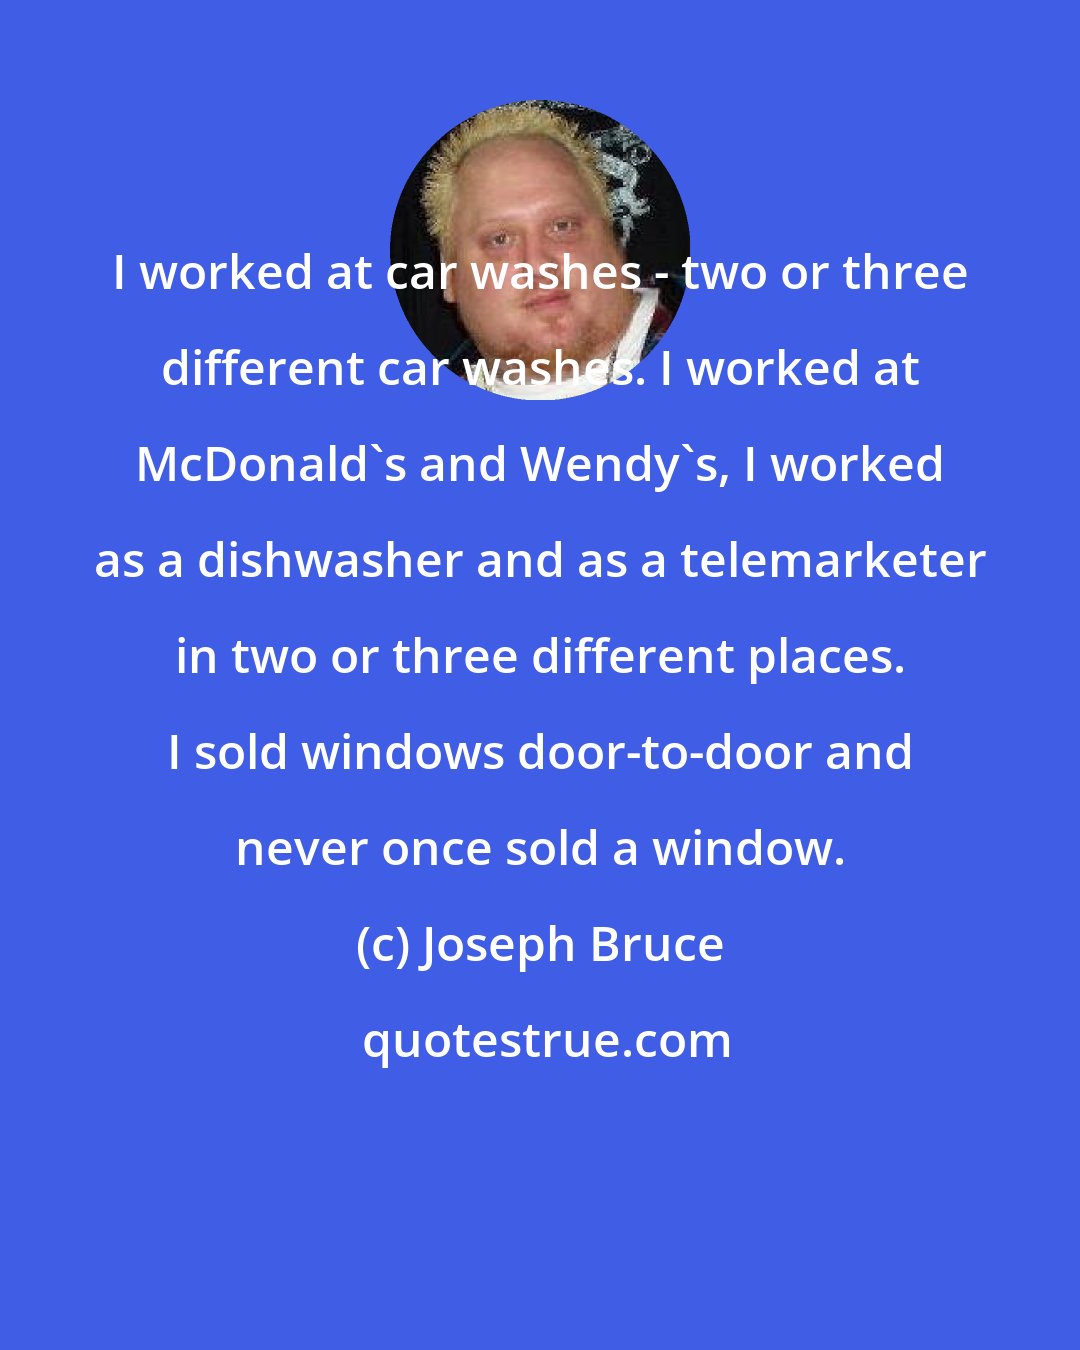 Joseph Bruce: I worked at car washes - two or three different car washes. I worked at McDonald's and Wendy's, I worked as a dishwasher and as a telemarketer in two or three different places. I sold windows door-to-door and never once sold a window.